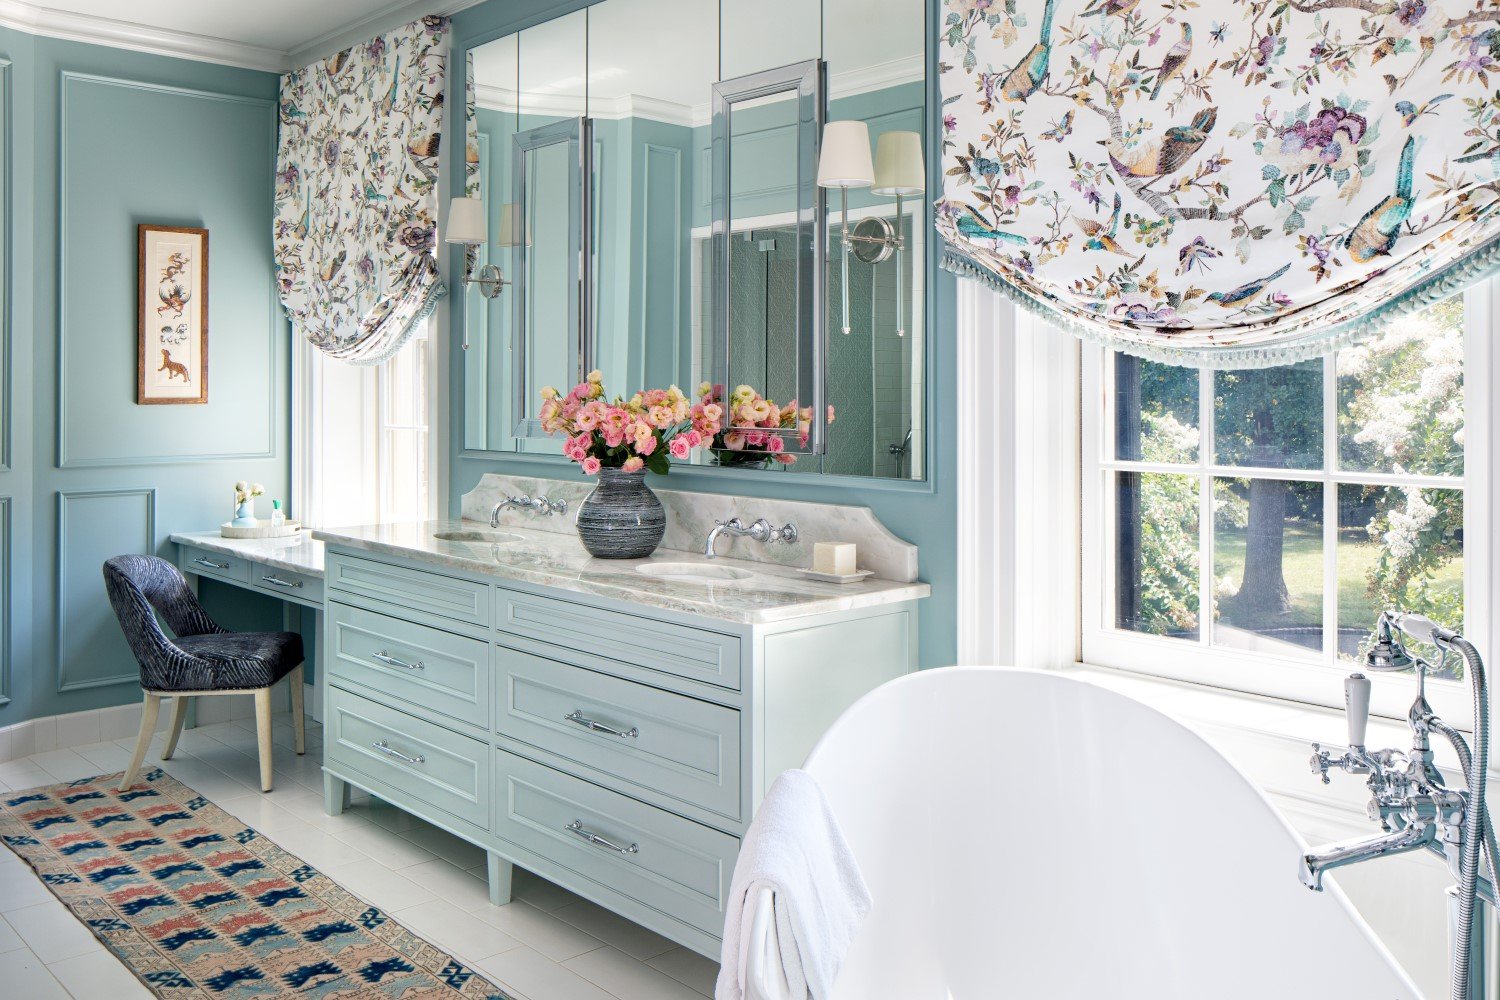  Classically designed bathroom with rich teal walls and a pale teal double vanity created by Bridget Beari Designs 